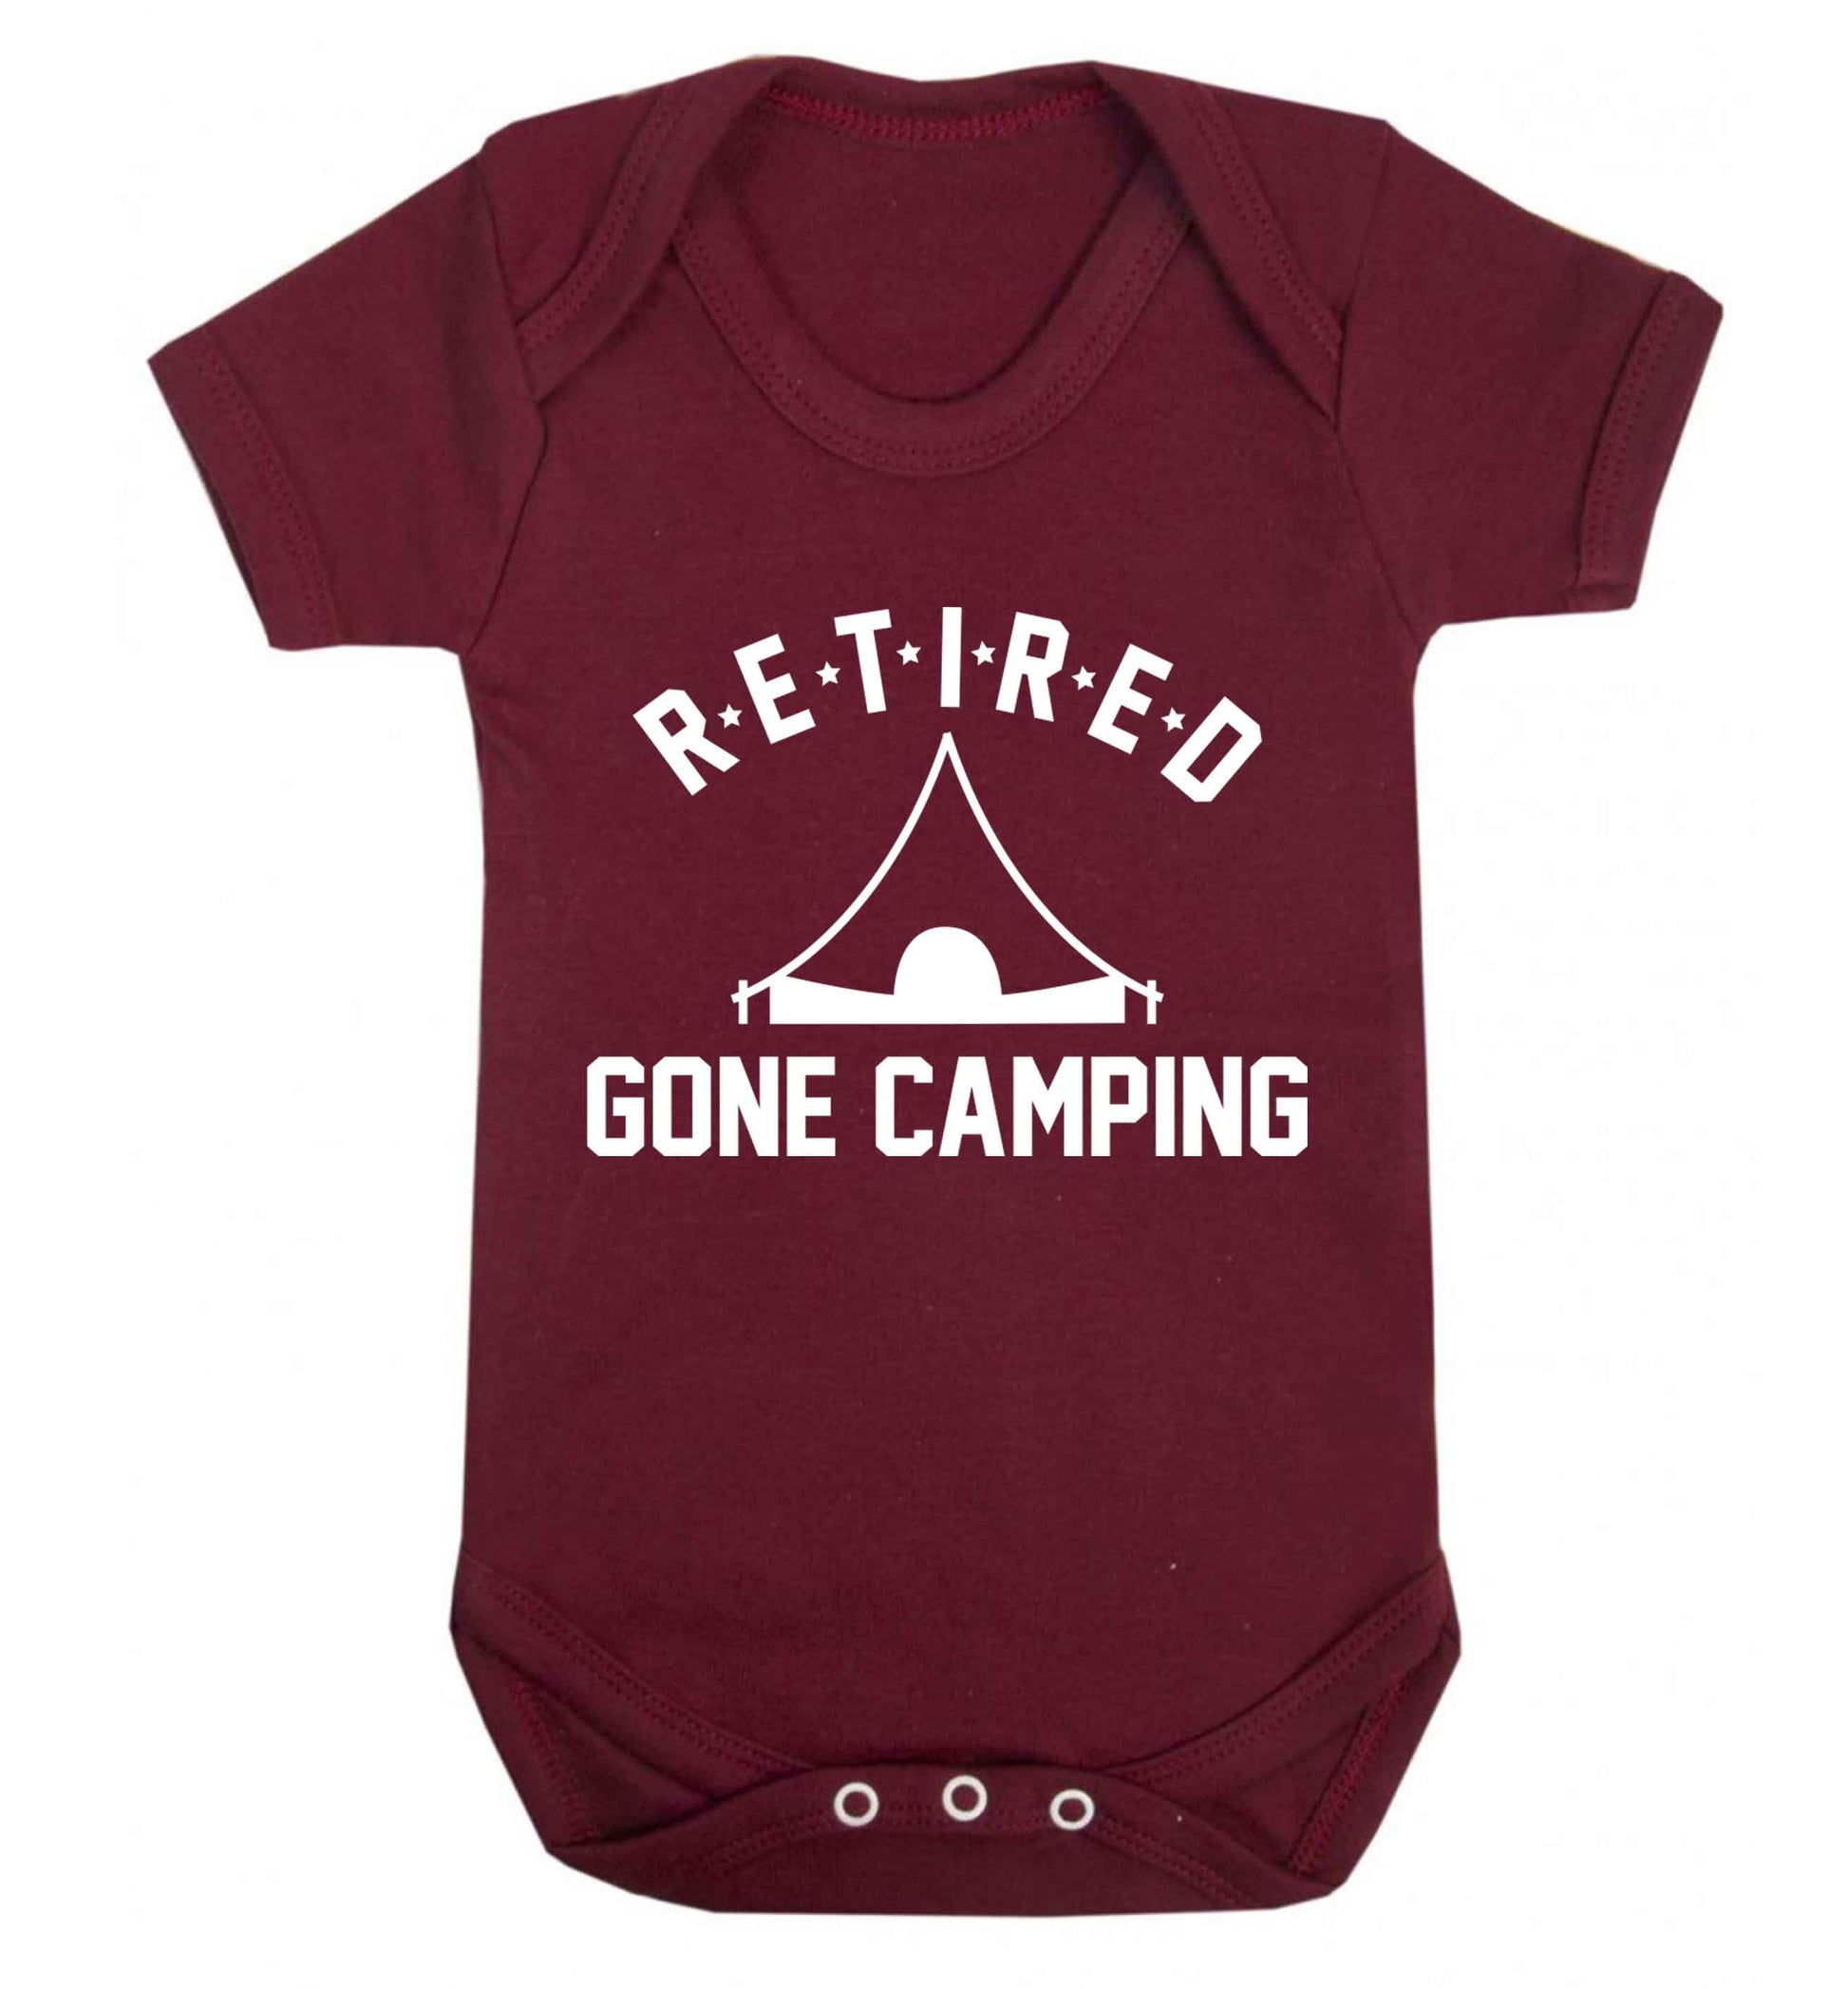 Retired gone camping Baby Vest maroon 18-24 months